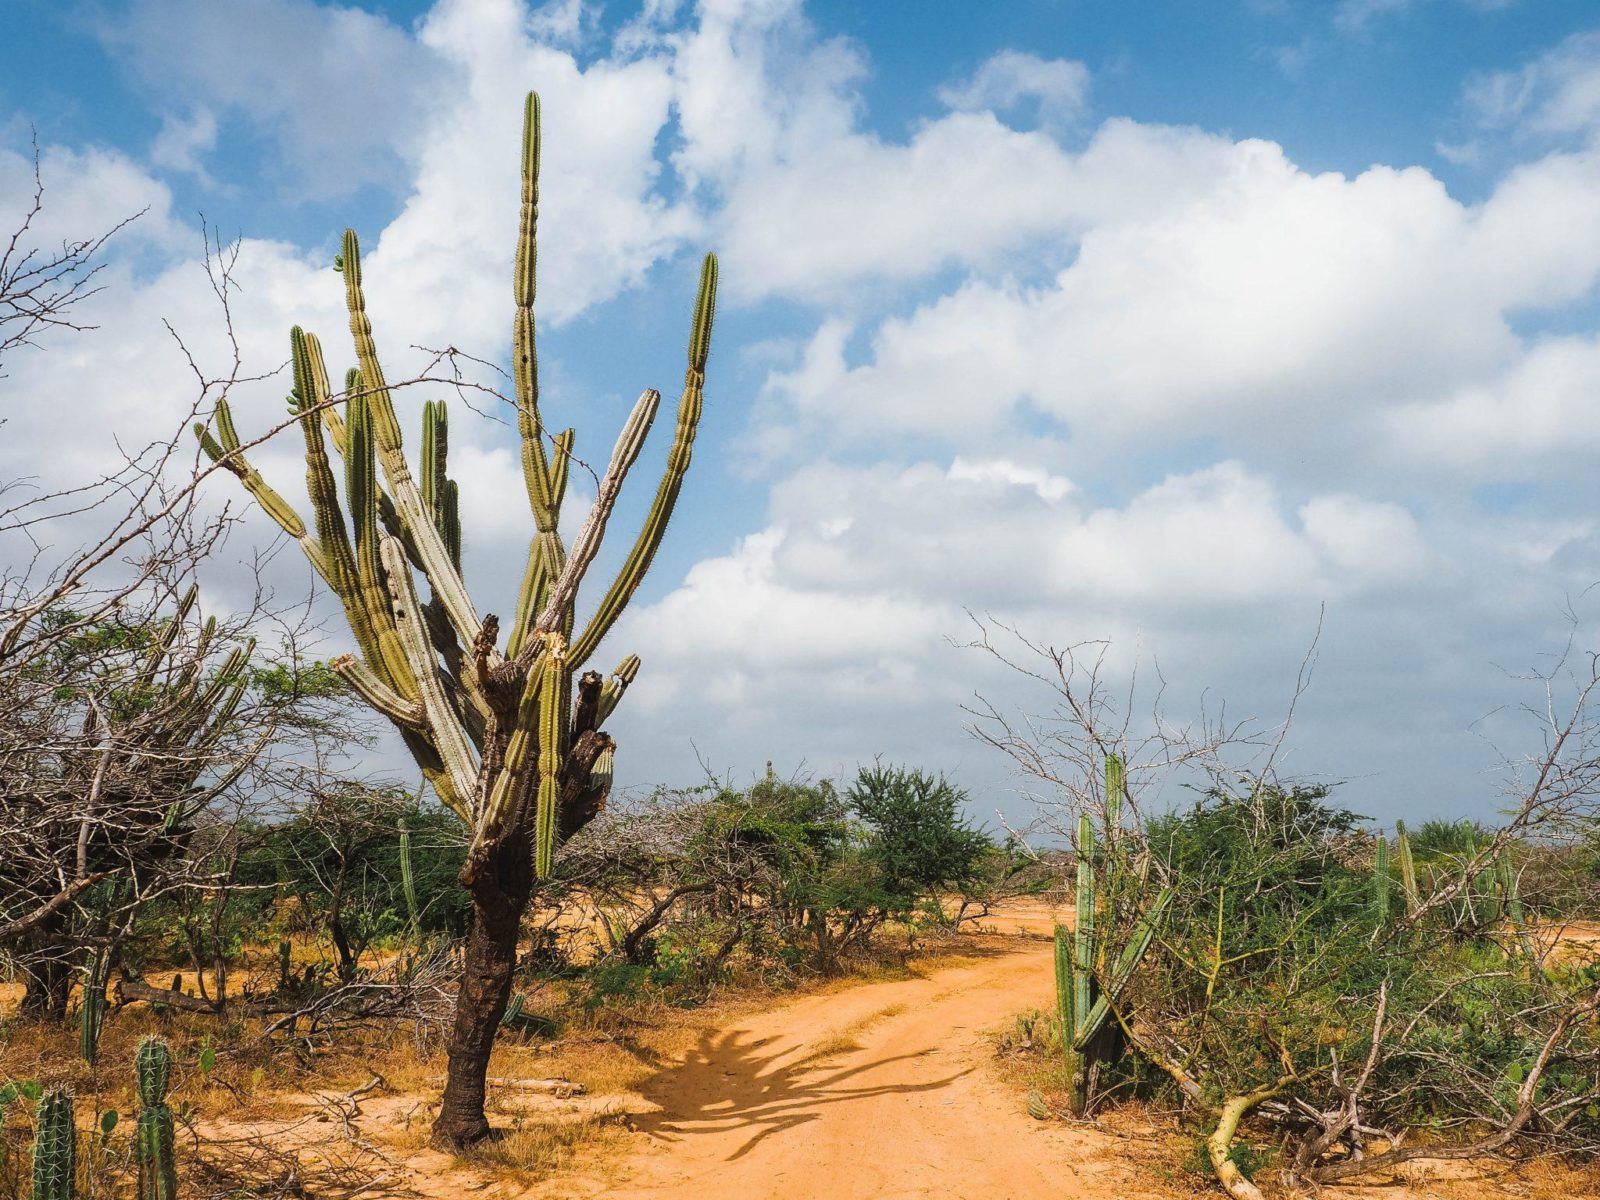 A dirt road with cactus trees in Punta Gallinas.